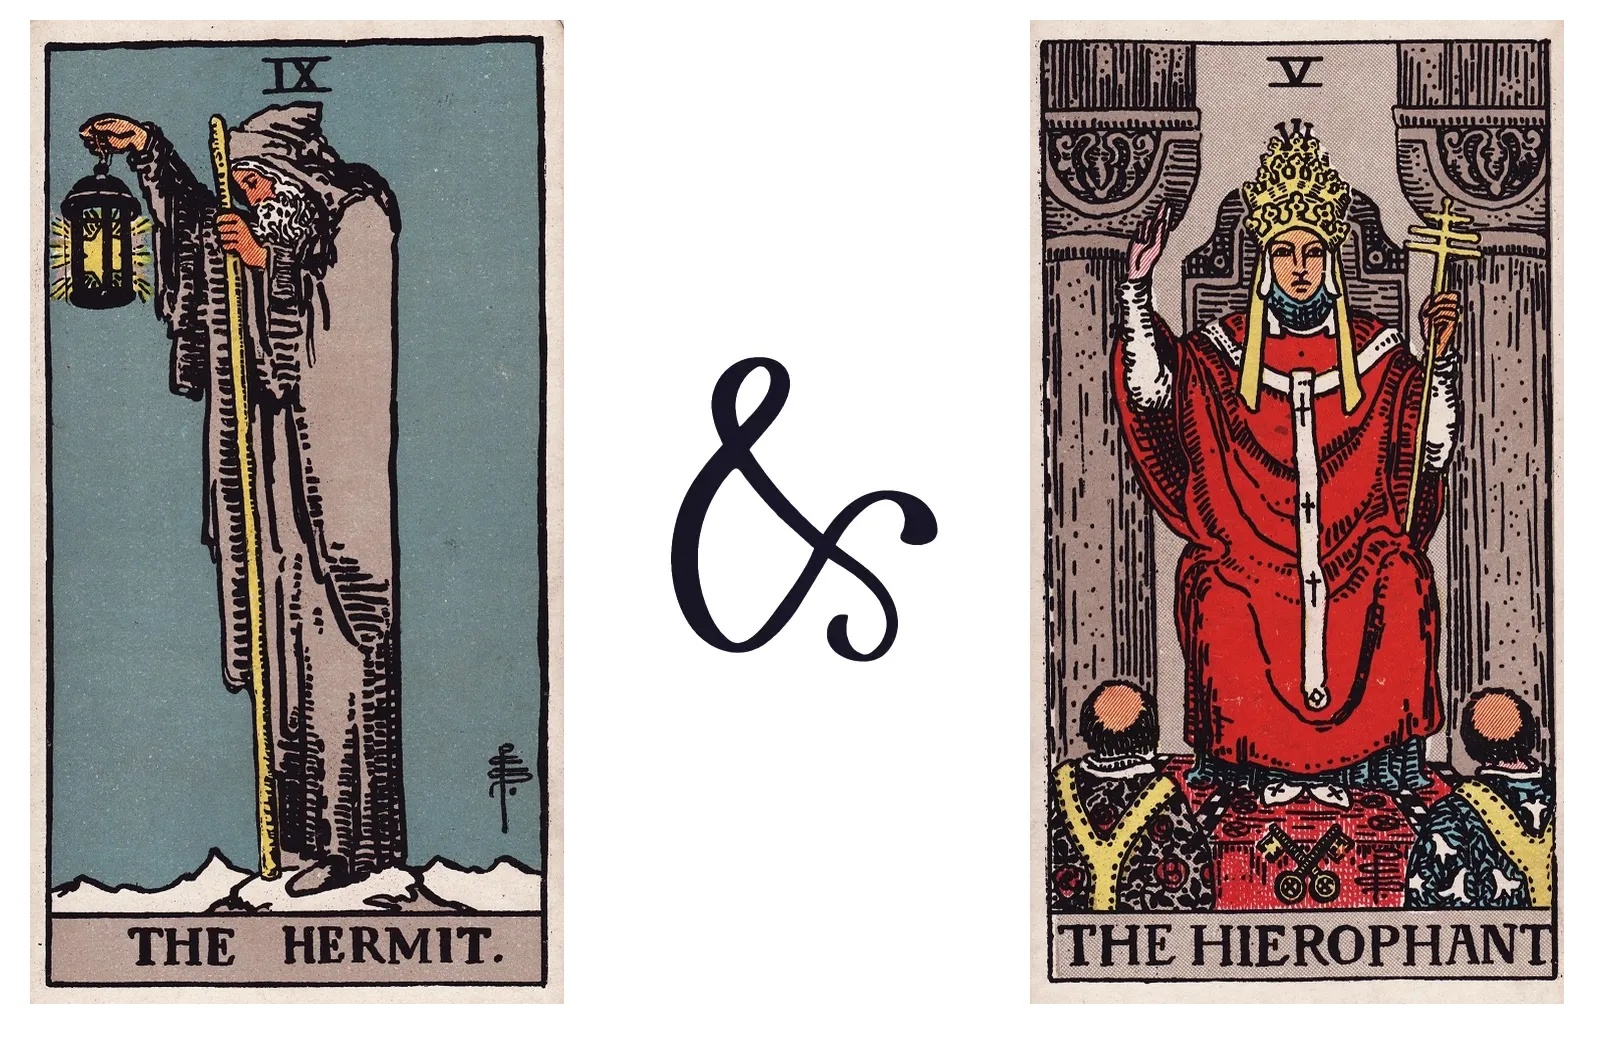 The Hermit and The Hierophant